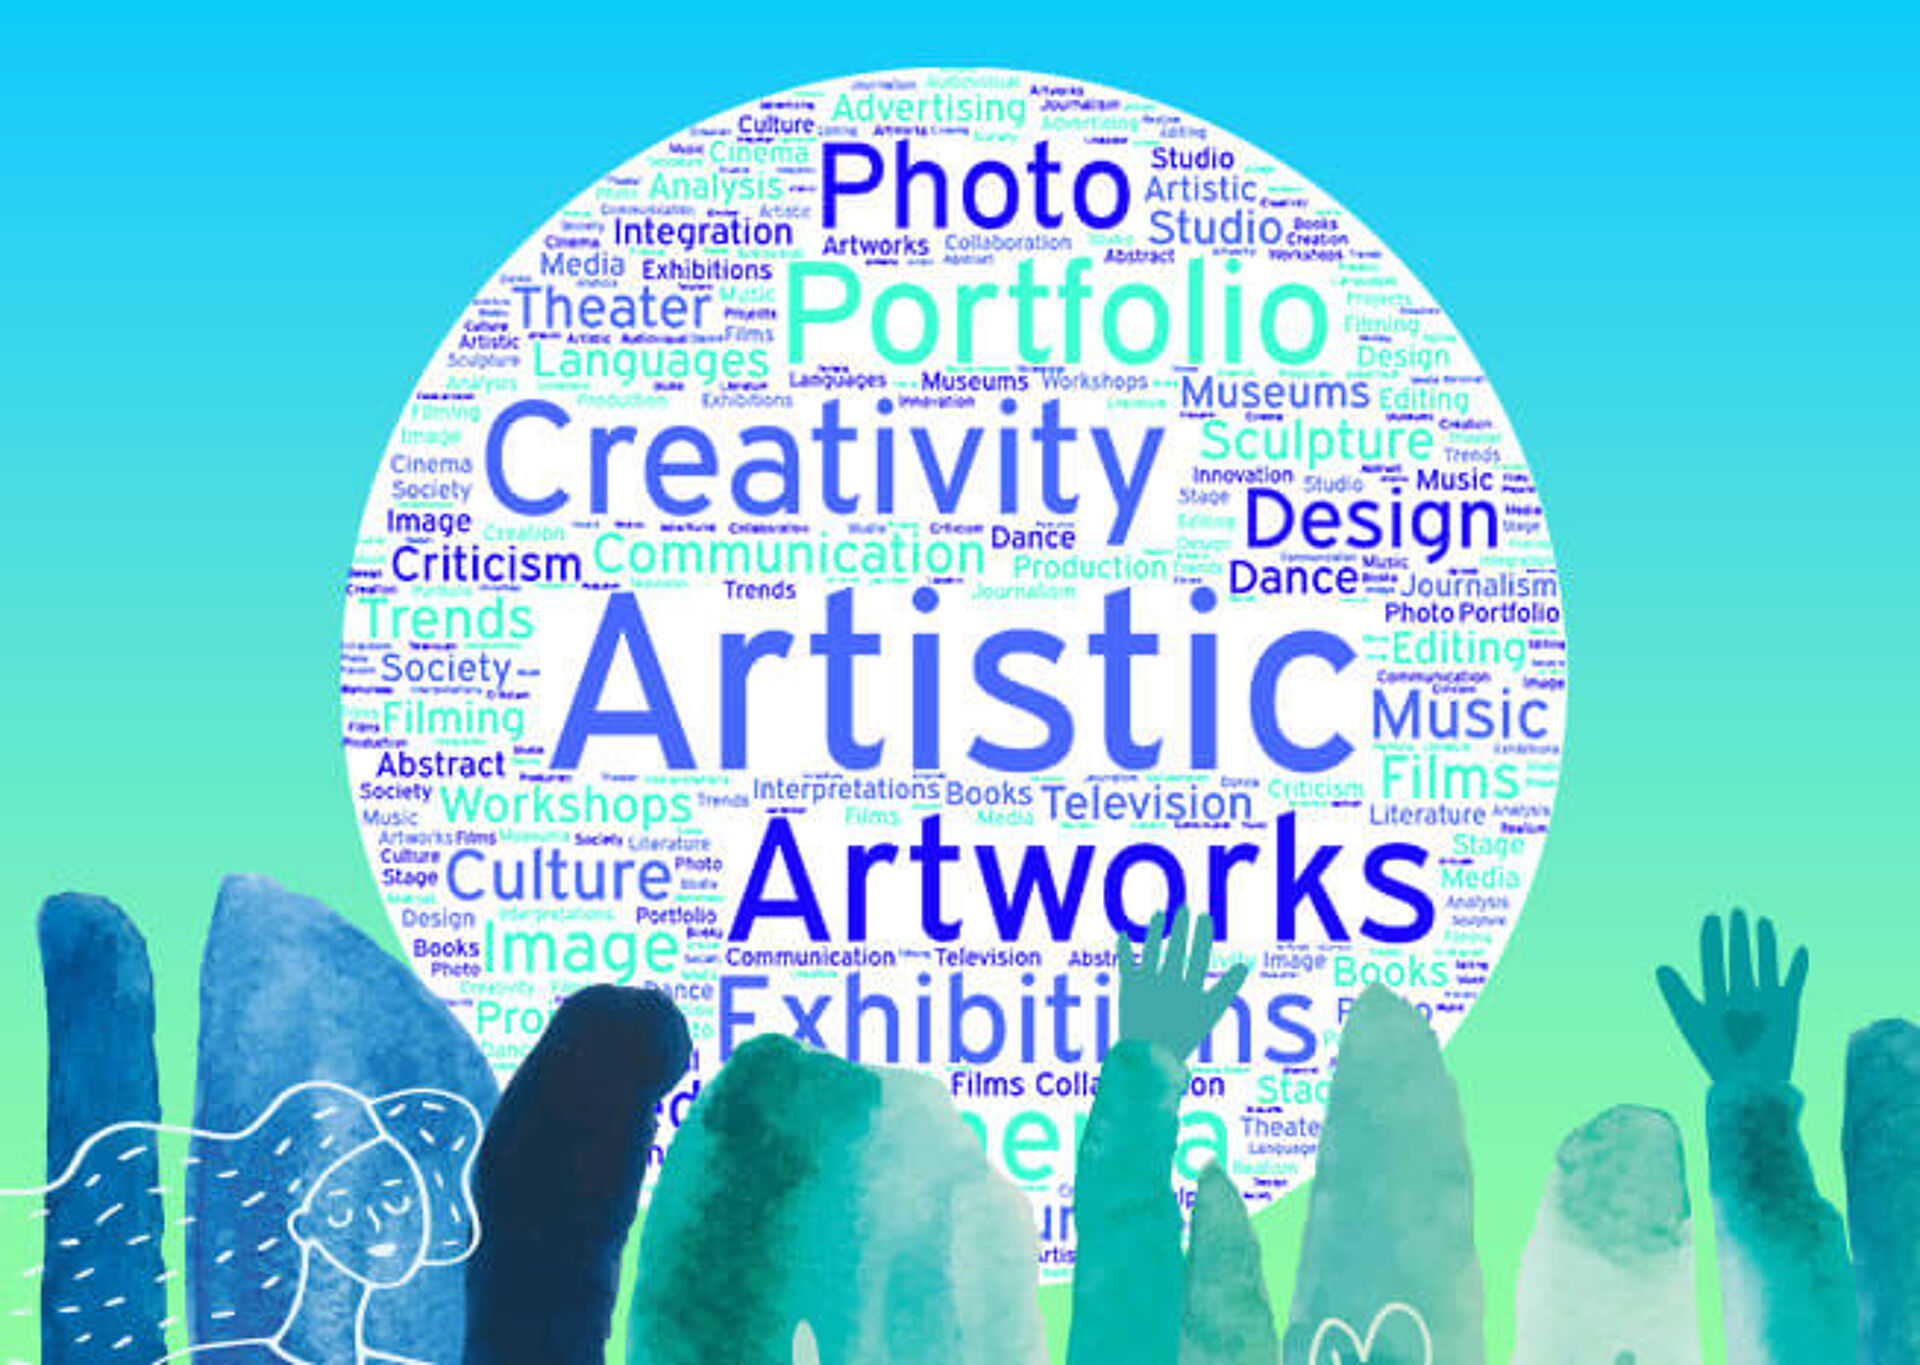 Silhouetted figures raising hands against a backdrop of a word cloud themed around art and creativity.